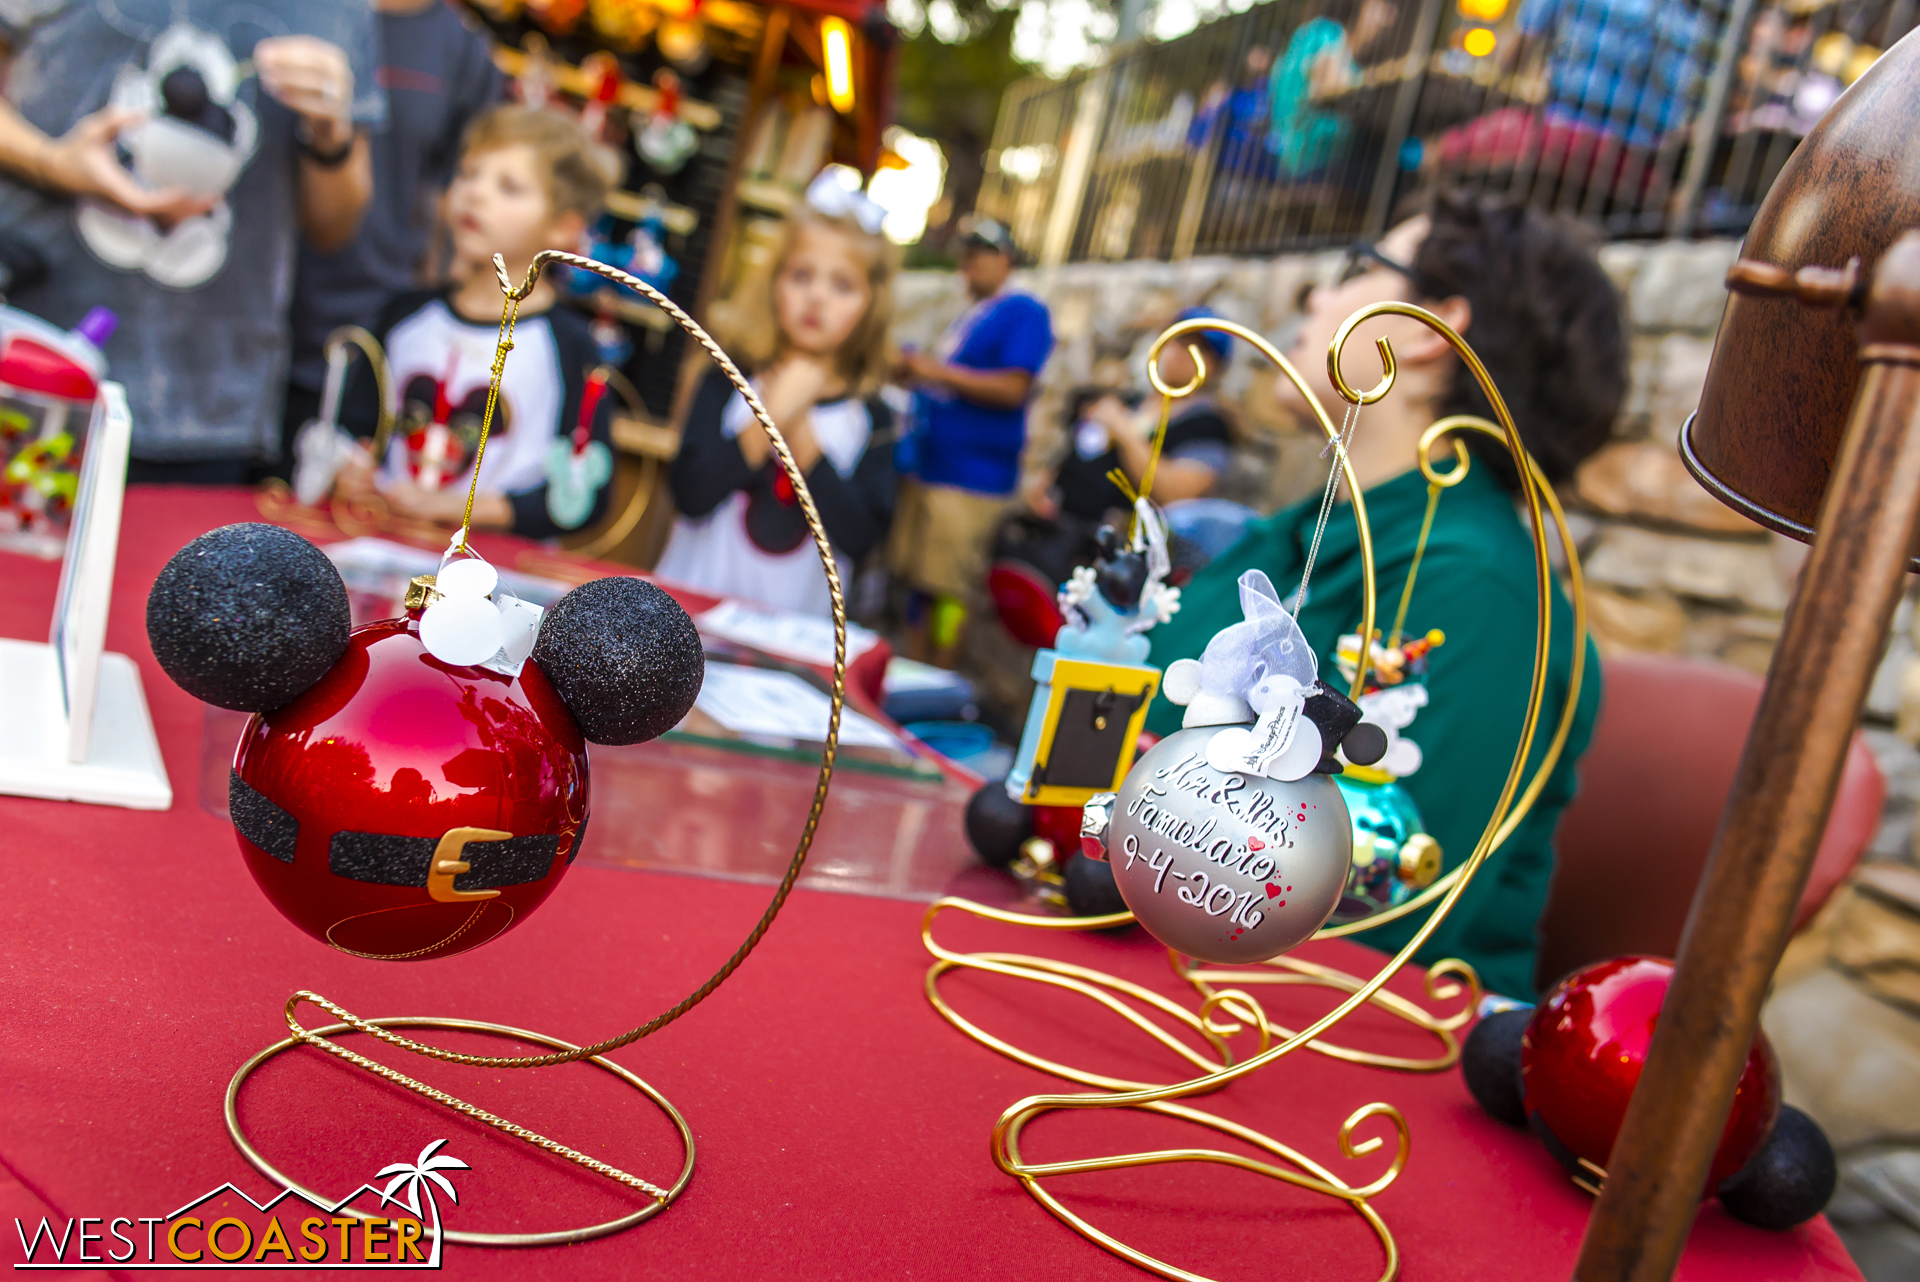  There are also crafts tables for guests to create holiday items. 